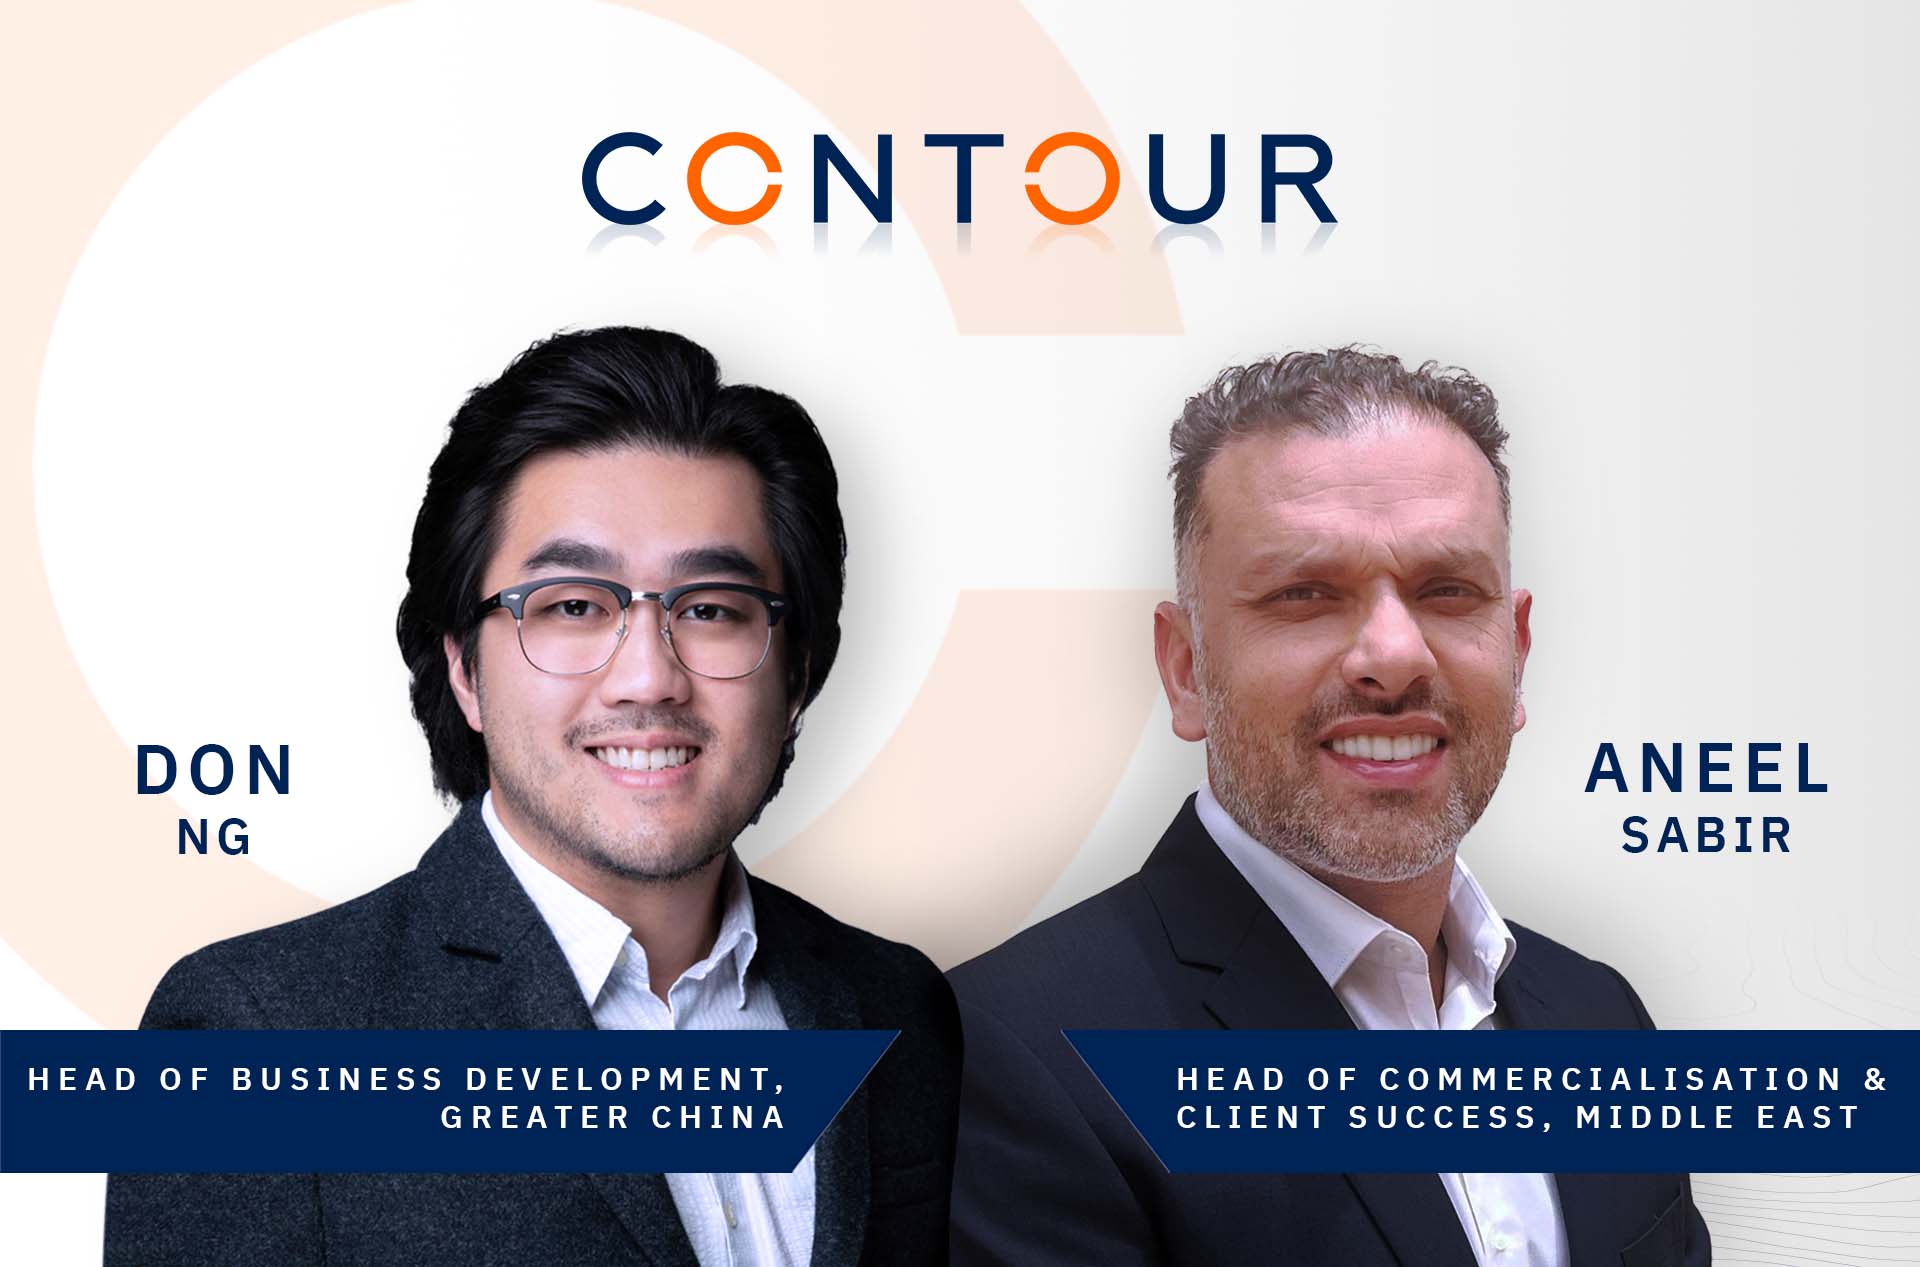 Contour strengthens its presence in the Middle East and Greater China with new hires  